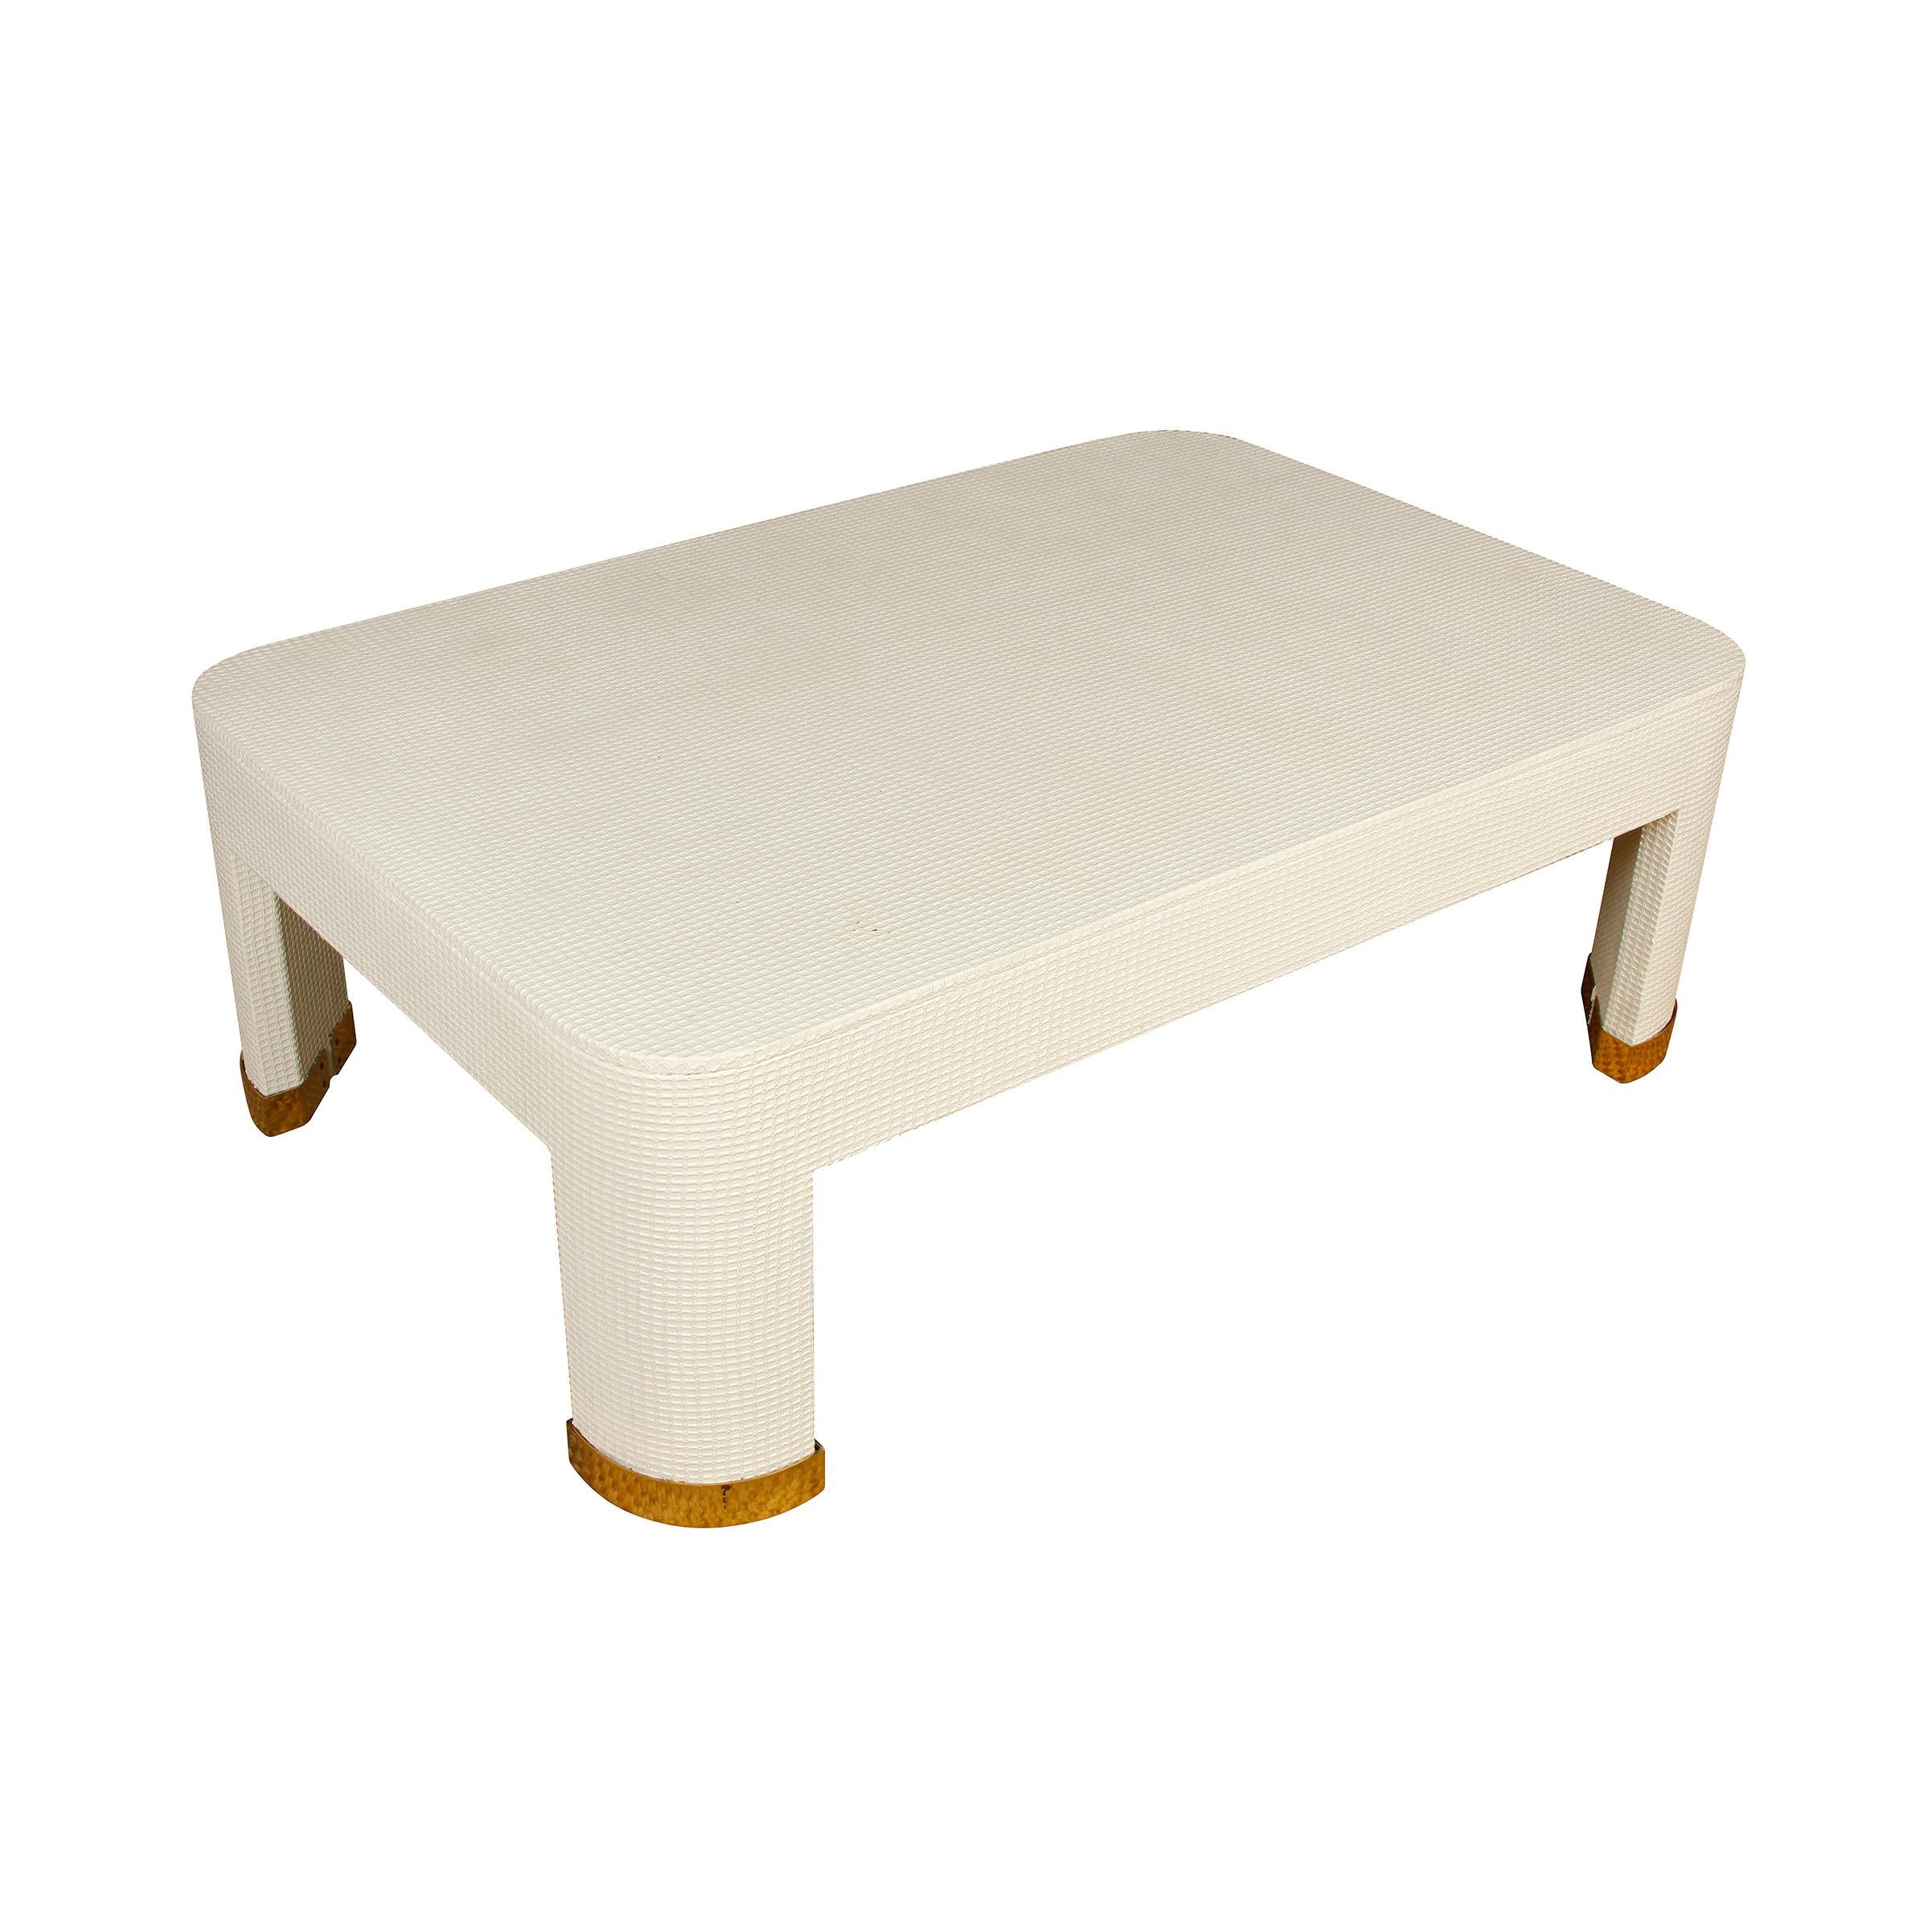 Vintage white textured cocktail table with brass feet. Rectangular table with rounded corners and legs.